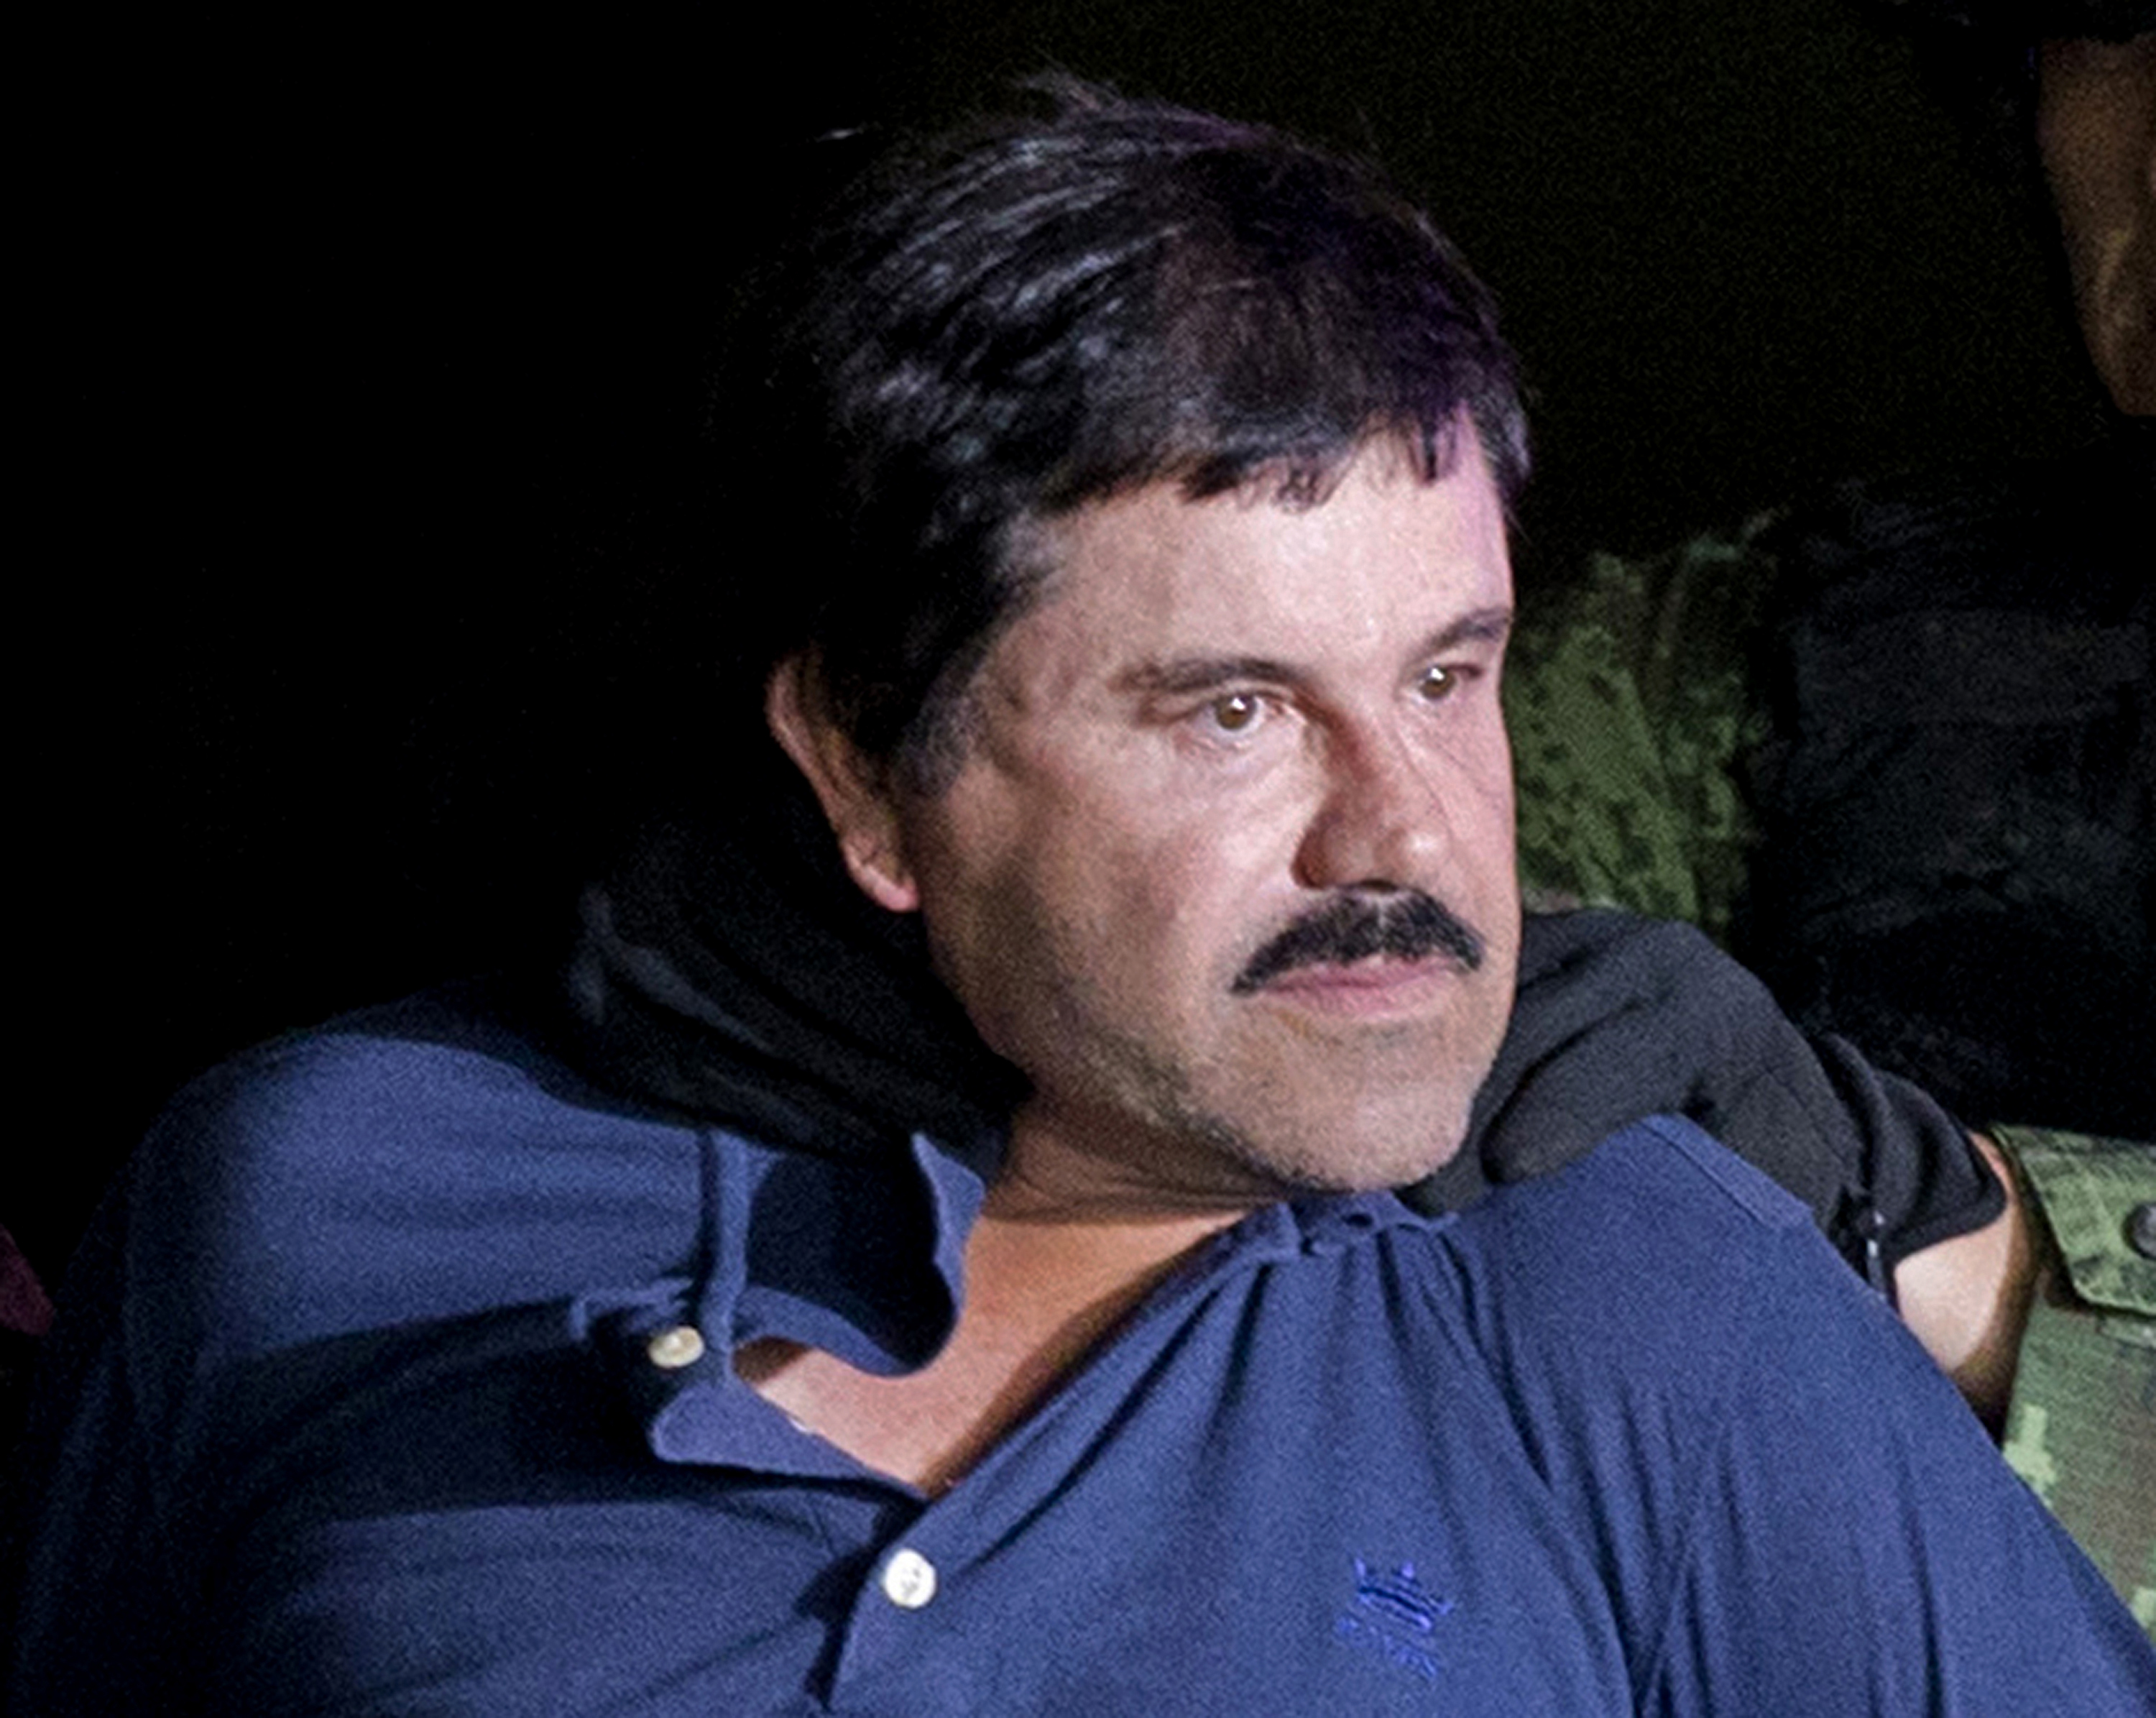 Drug lord Joaquin “El Chapo” Guzmán Loera in January 2016 in Mexico City as he was escorted by Mexican soldiers following his recapture.